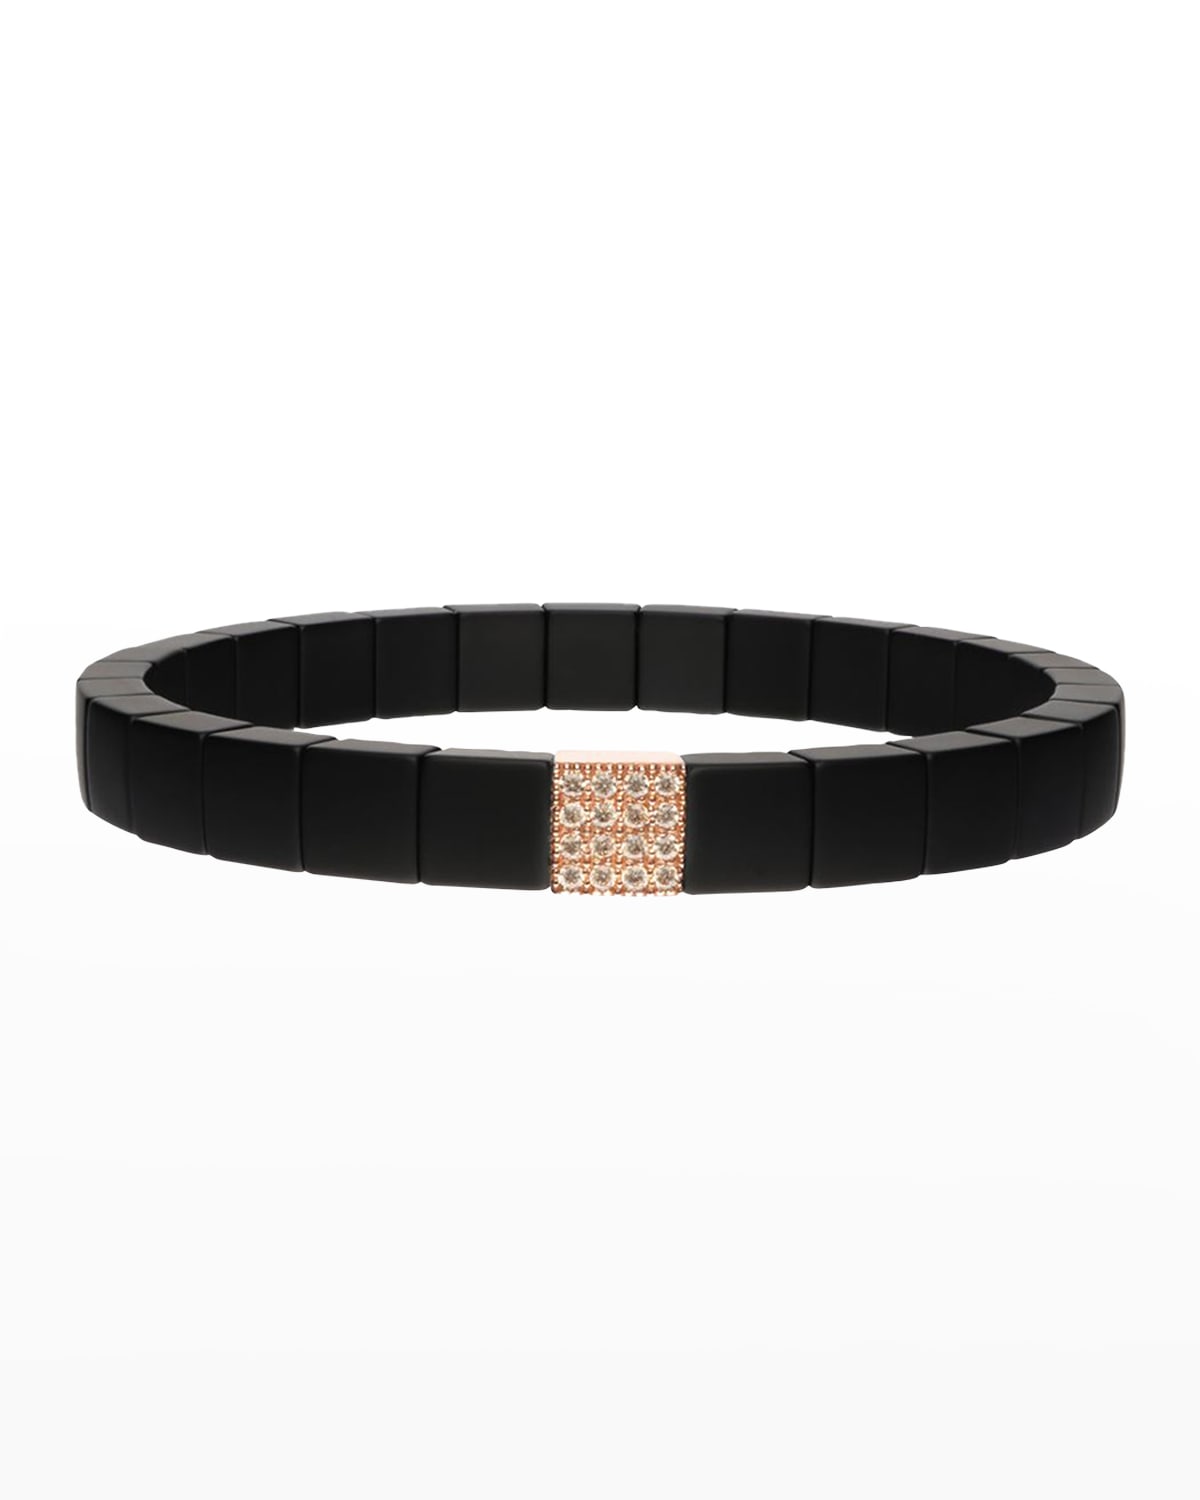 Rose Gold and Matte Black Ceramic Scacco Stretch Bracelet with One Champagne Diamond Section